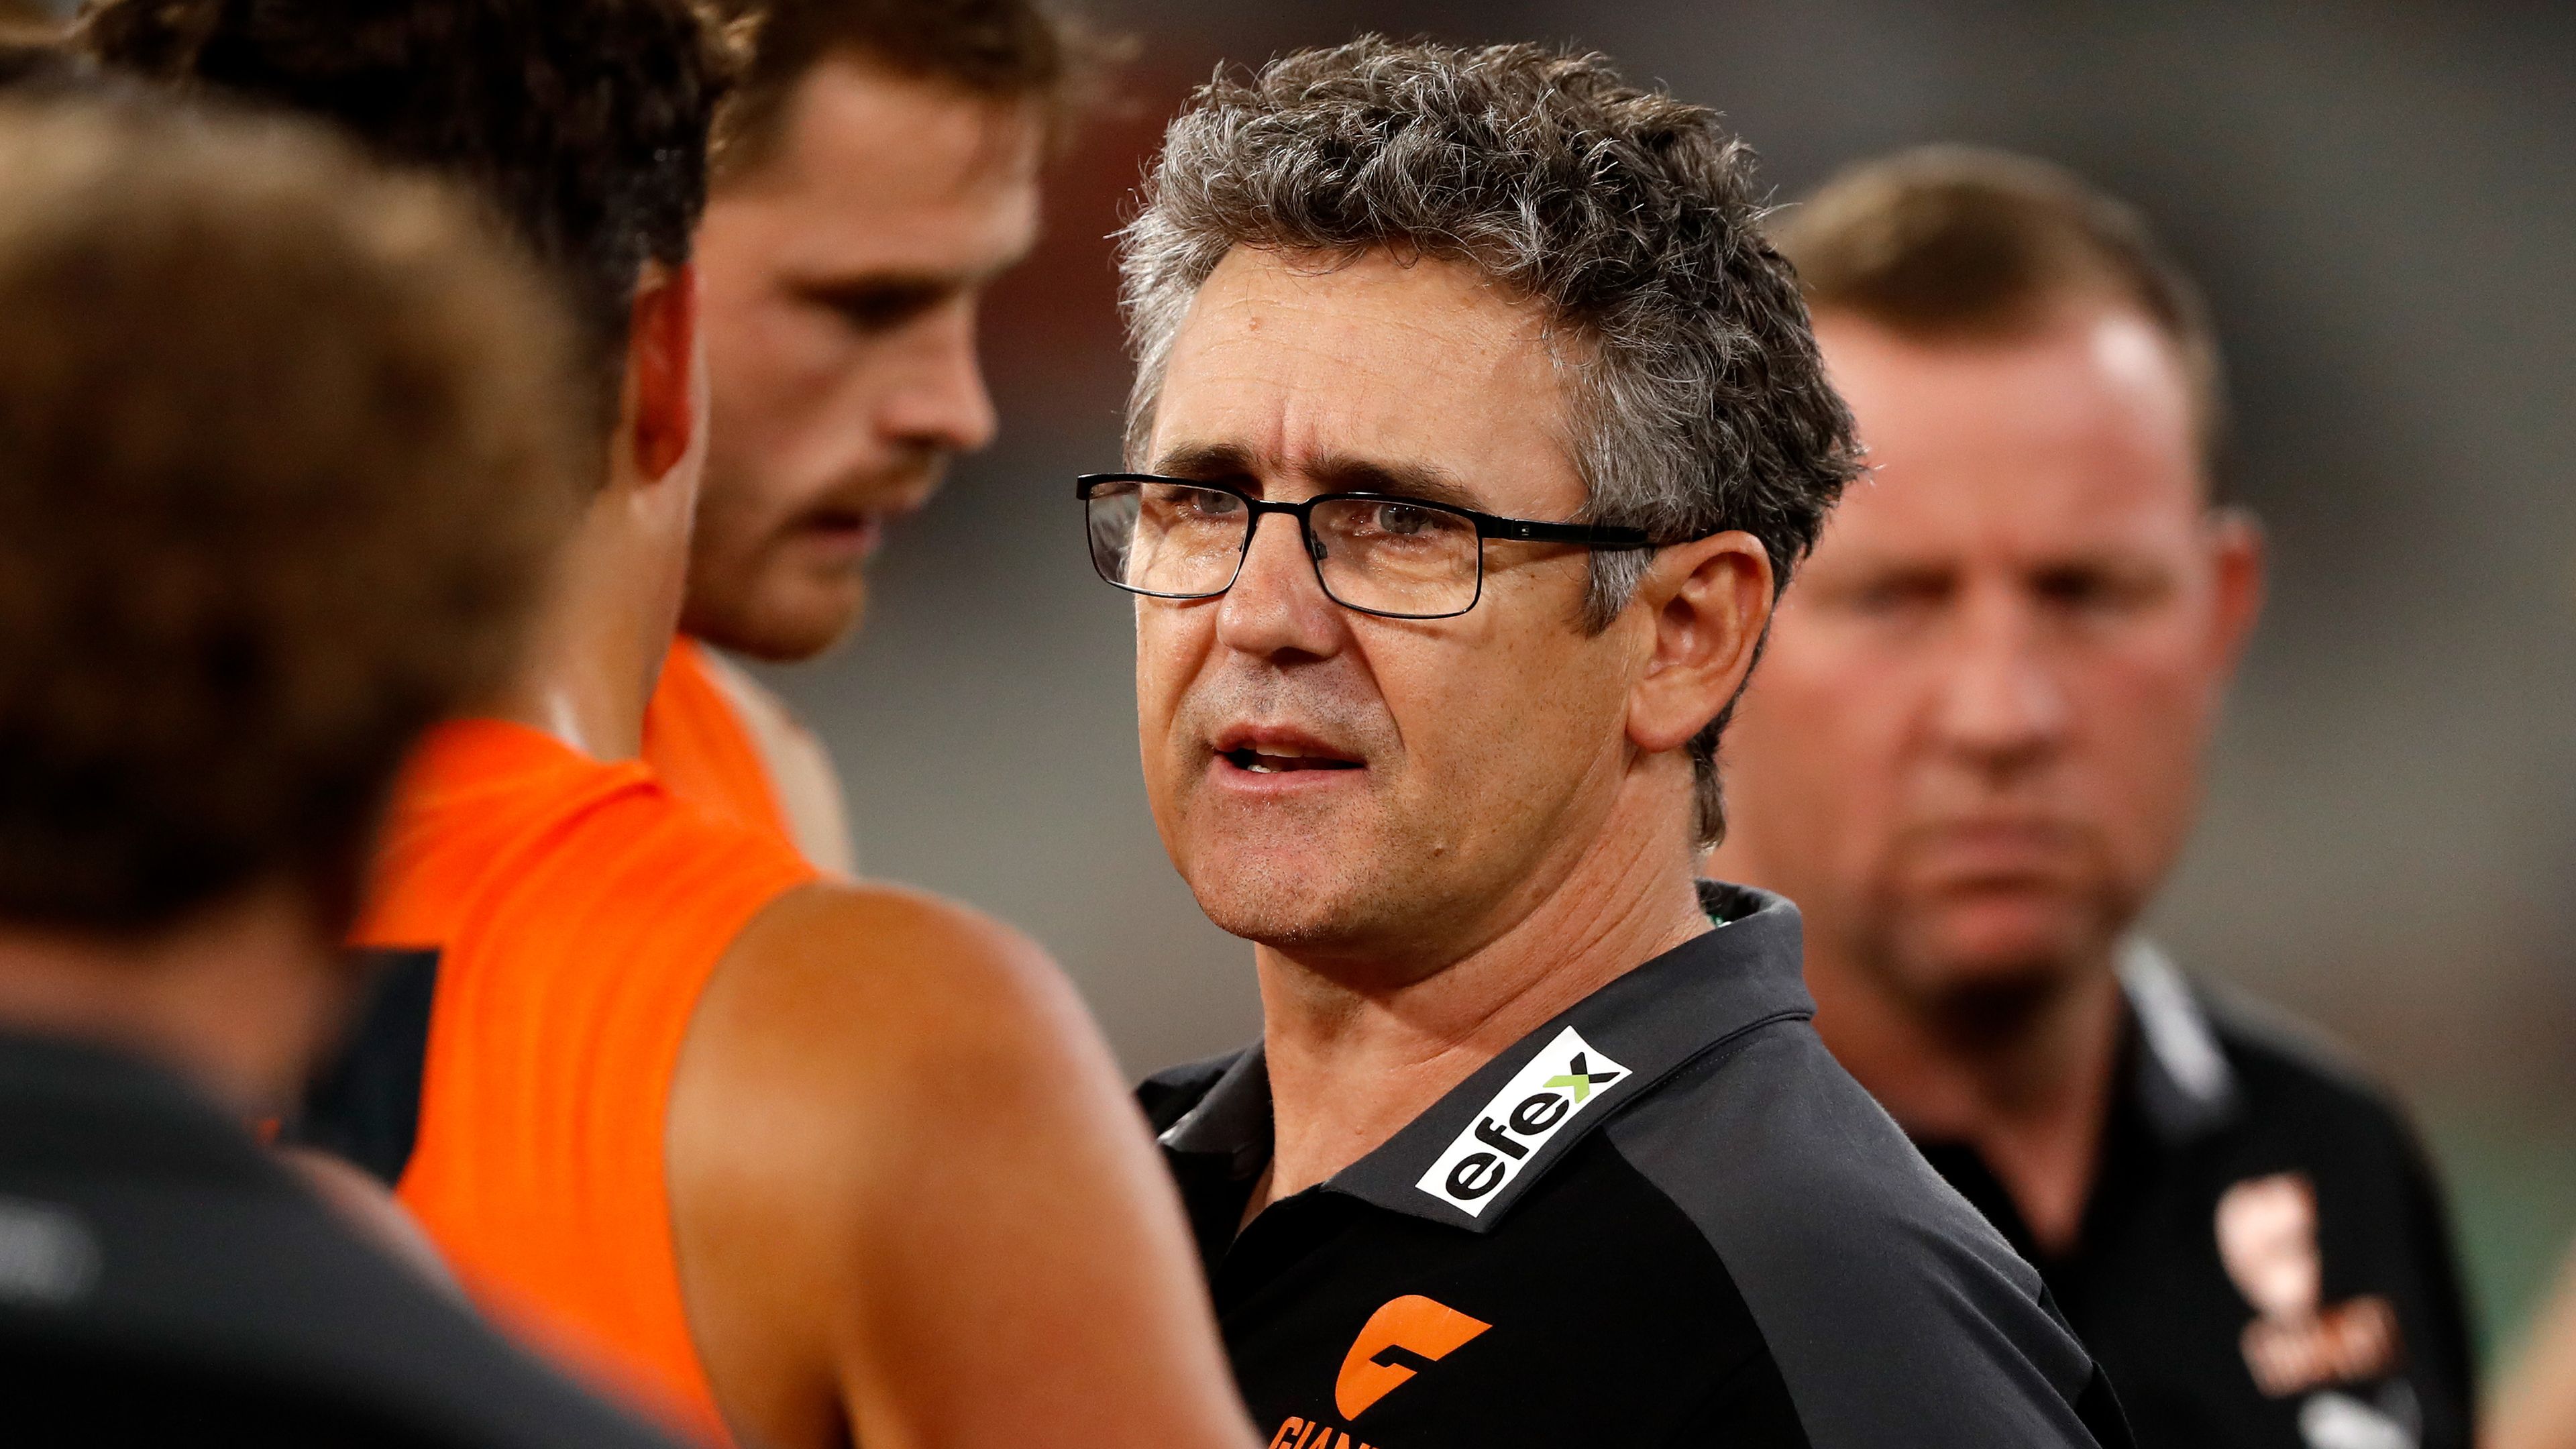 Leon Cameron's exit gives GWS Giants 'head start' in race to secure Alastair Clarkson, says Matthew Lloyd